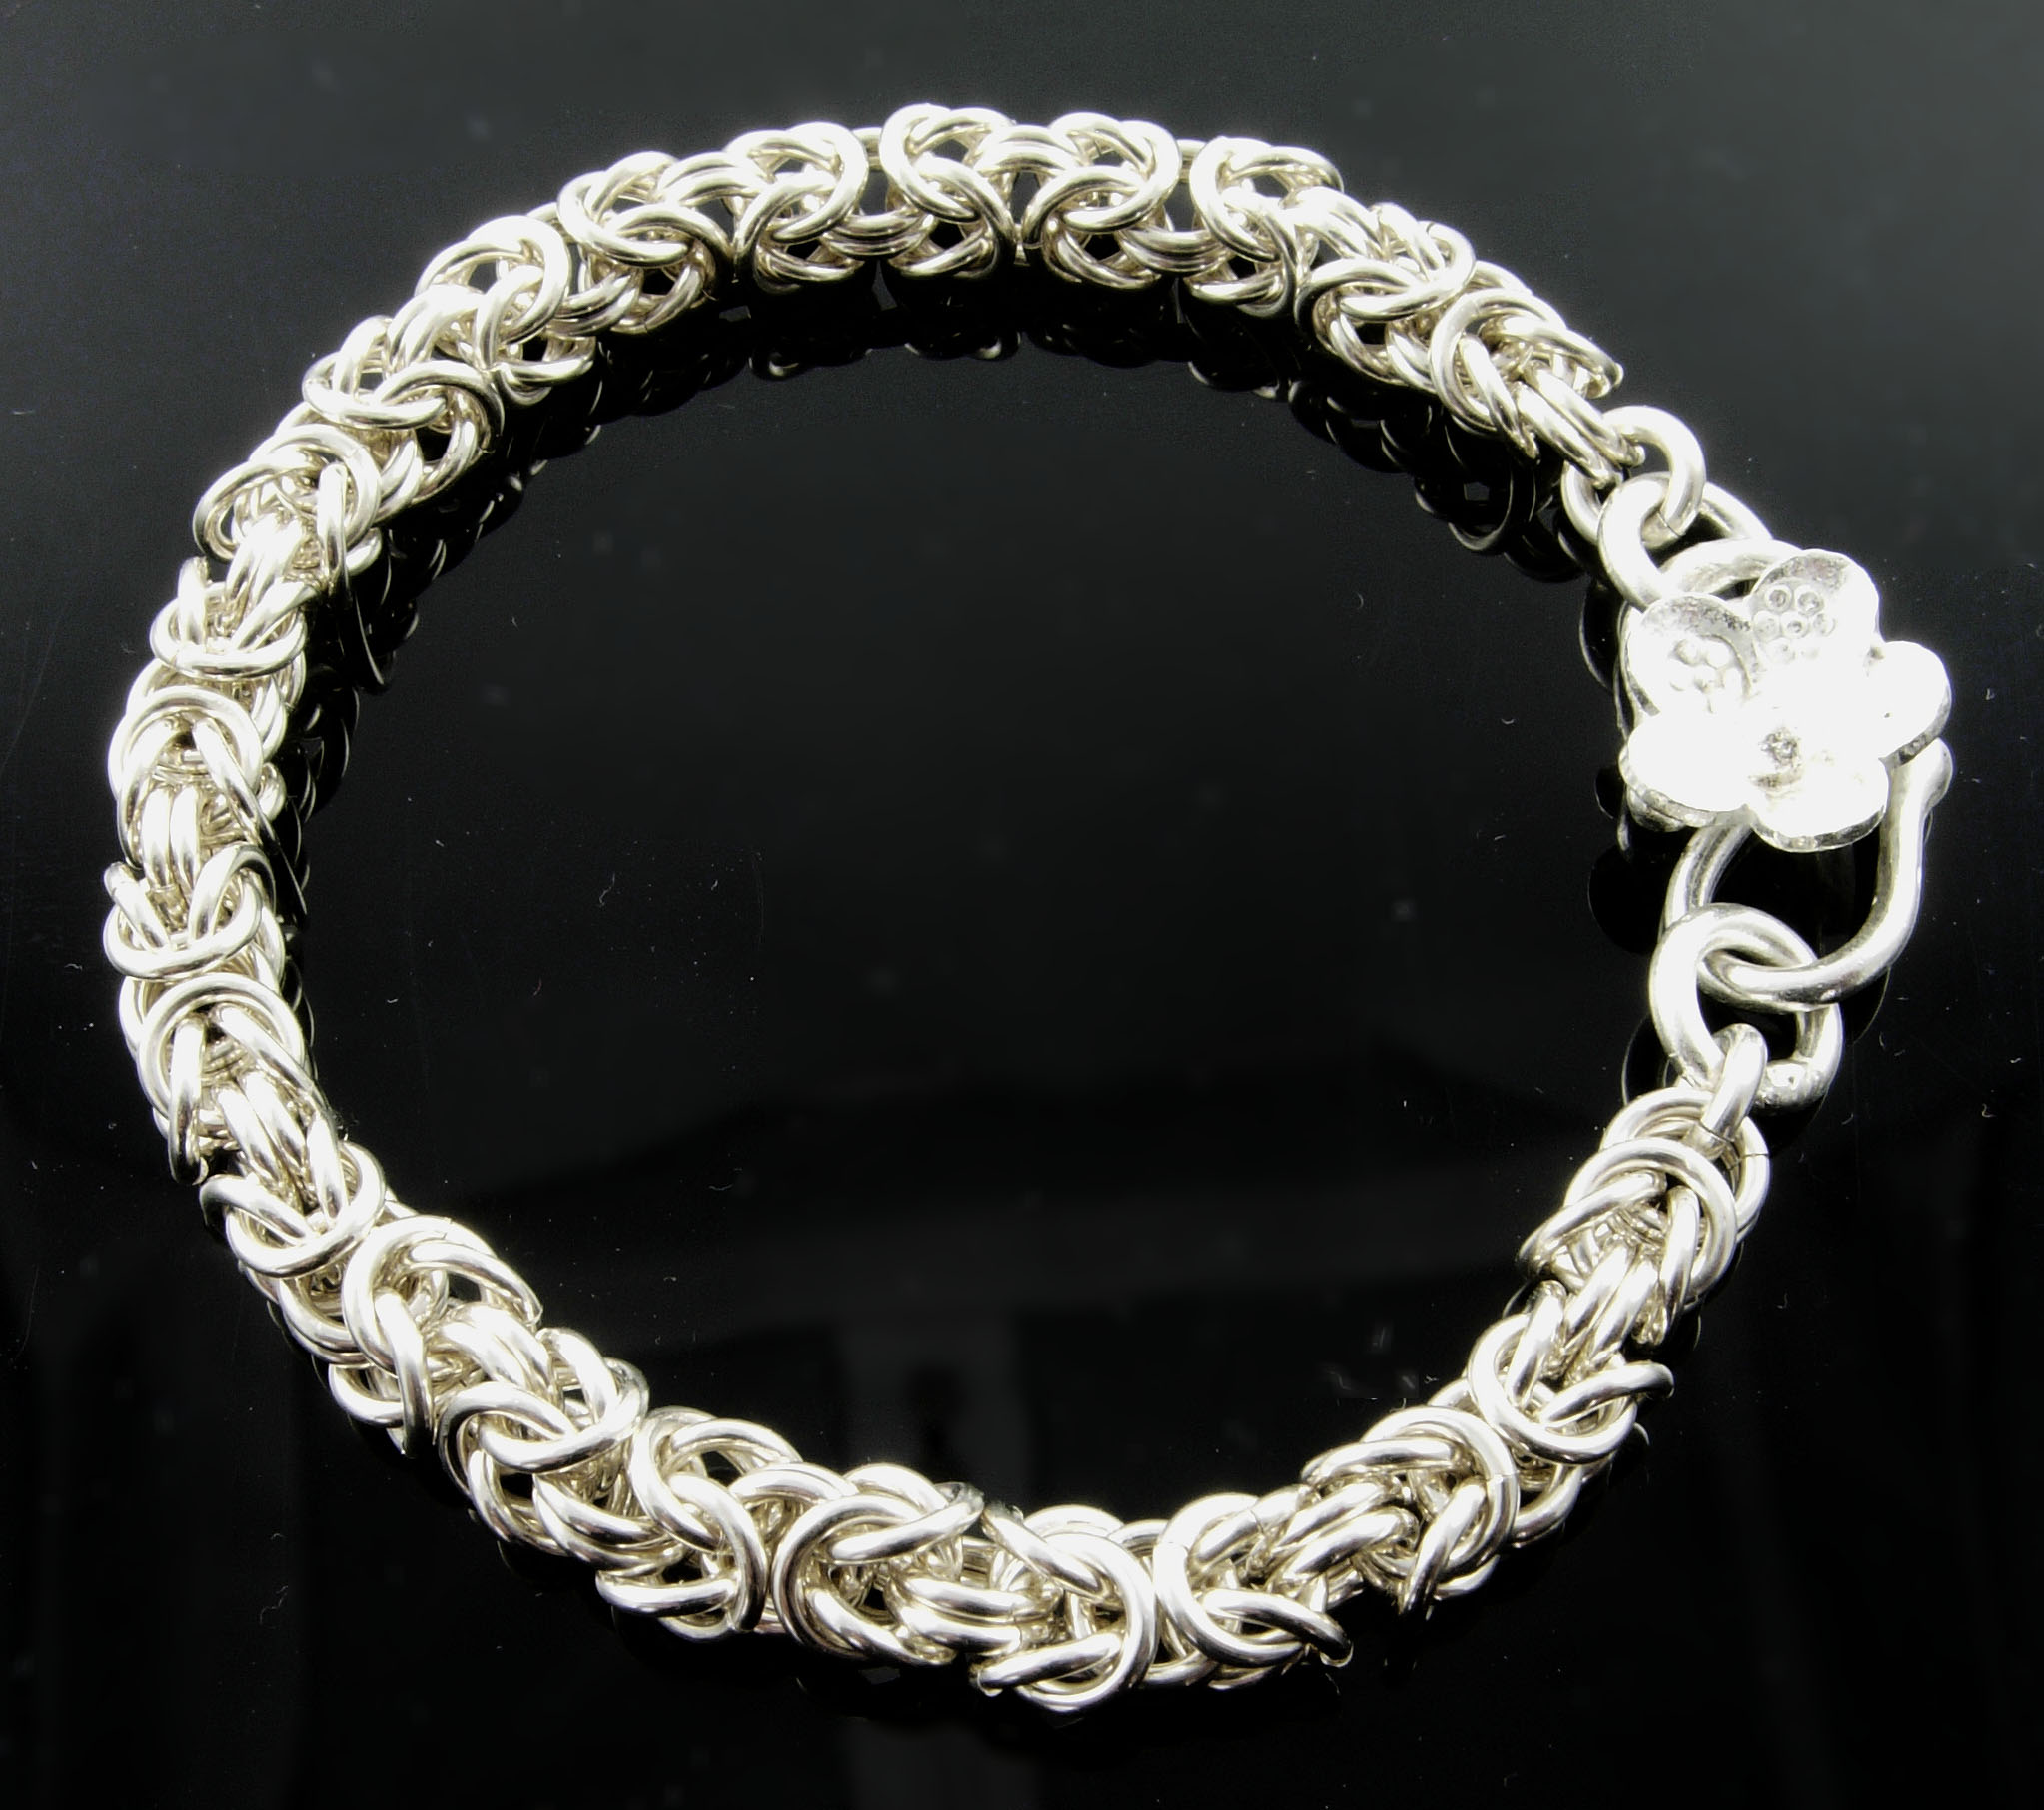 Top 5 Weaves for Chain Mail Beginners | Jewelry Making Blog ...